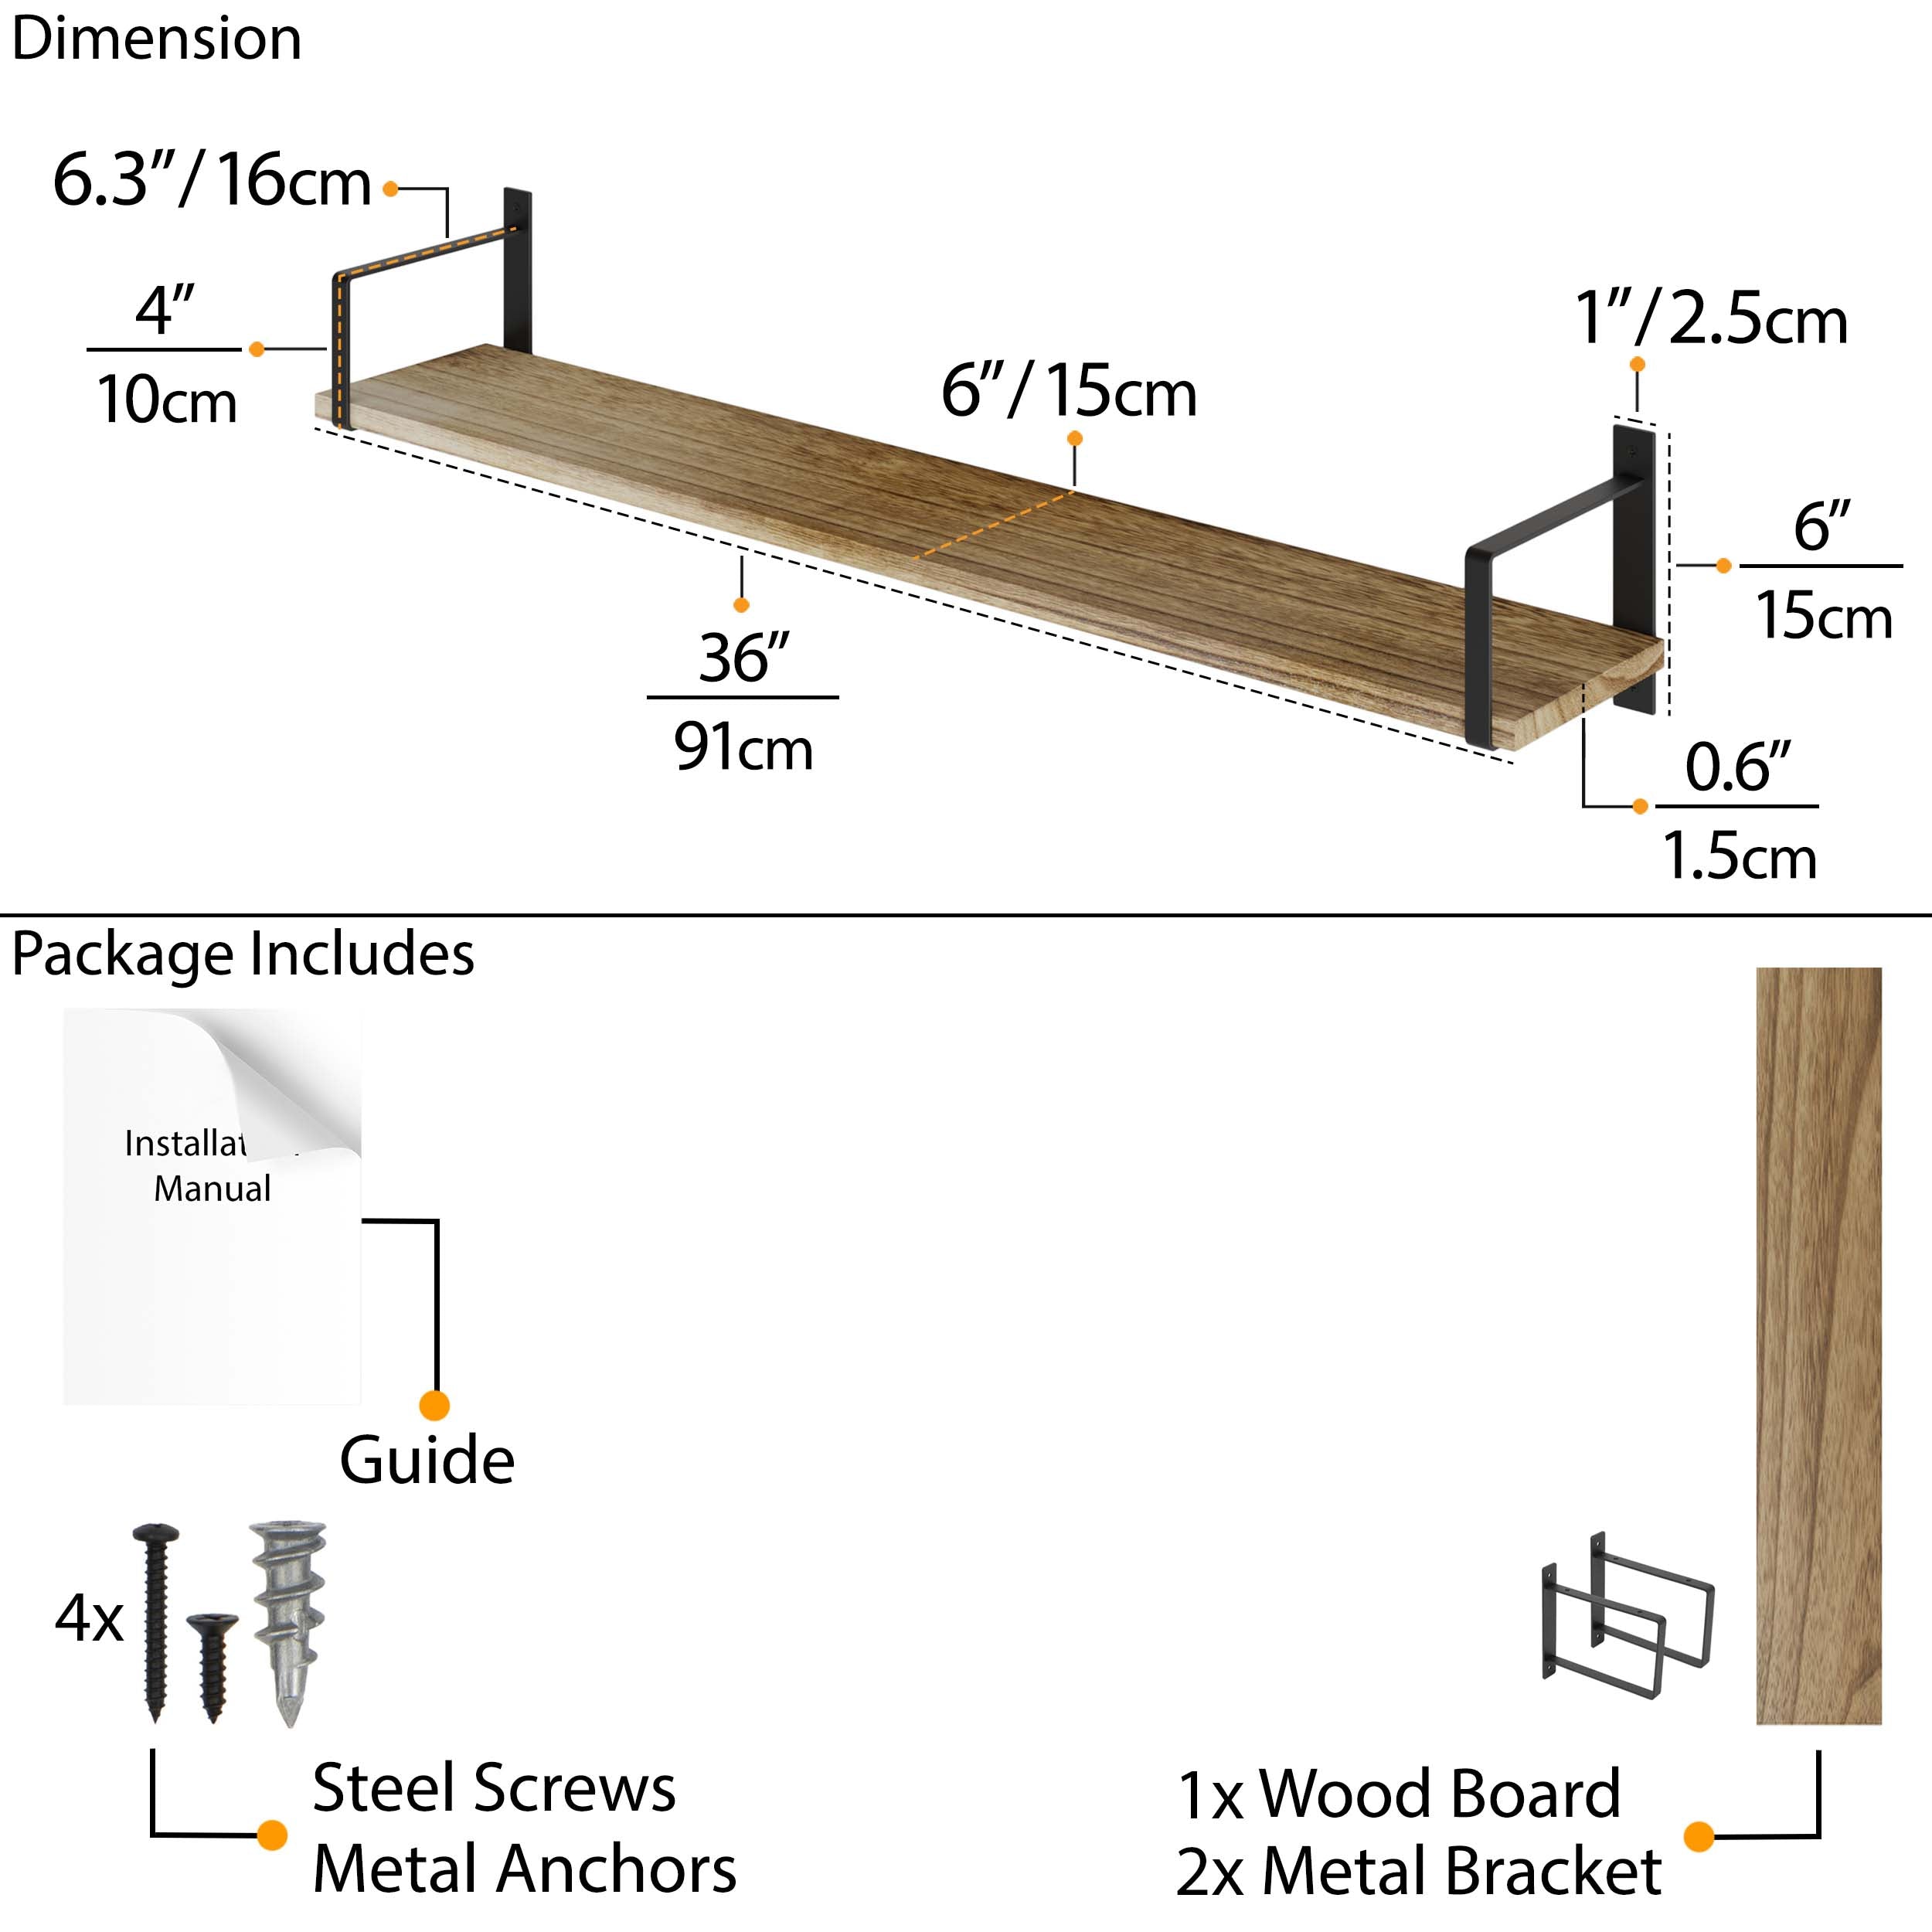 dimensions and components of a 36'' rustic shelf with black metal brackets, including screws and a manual.